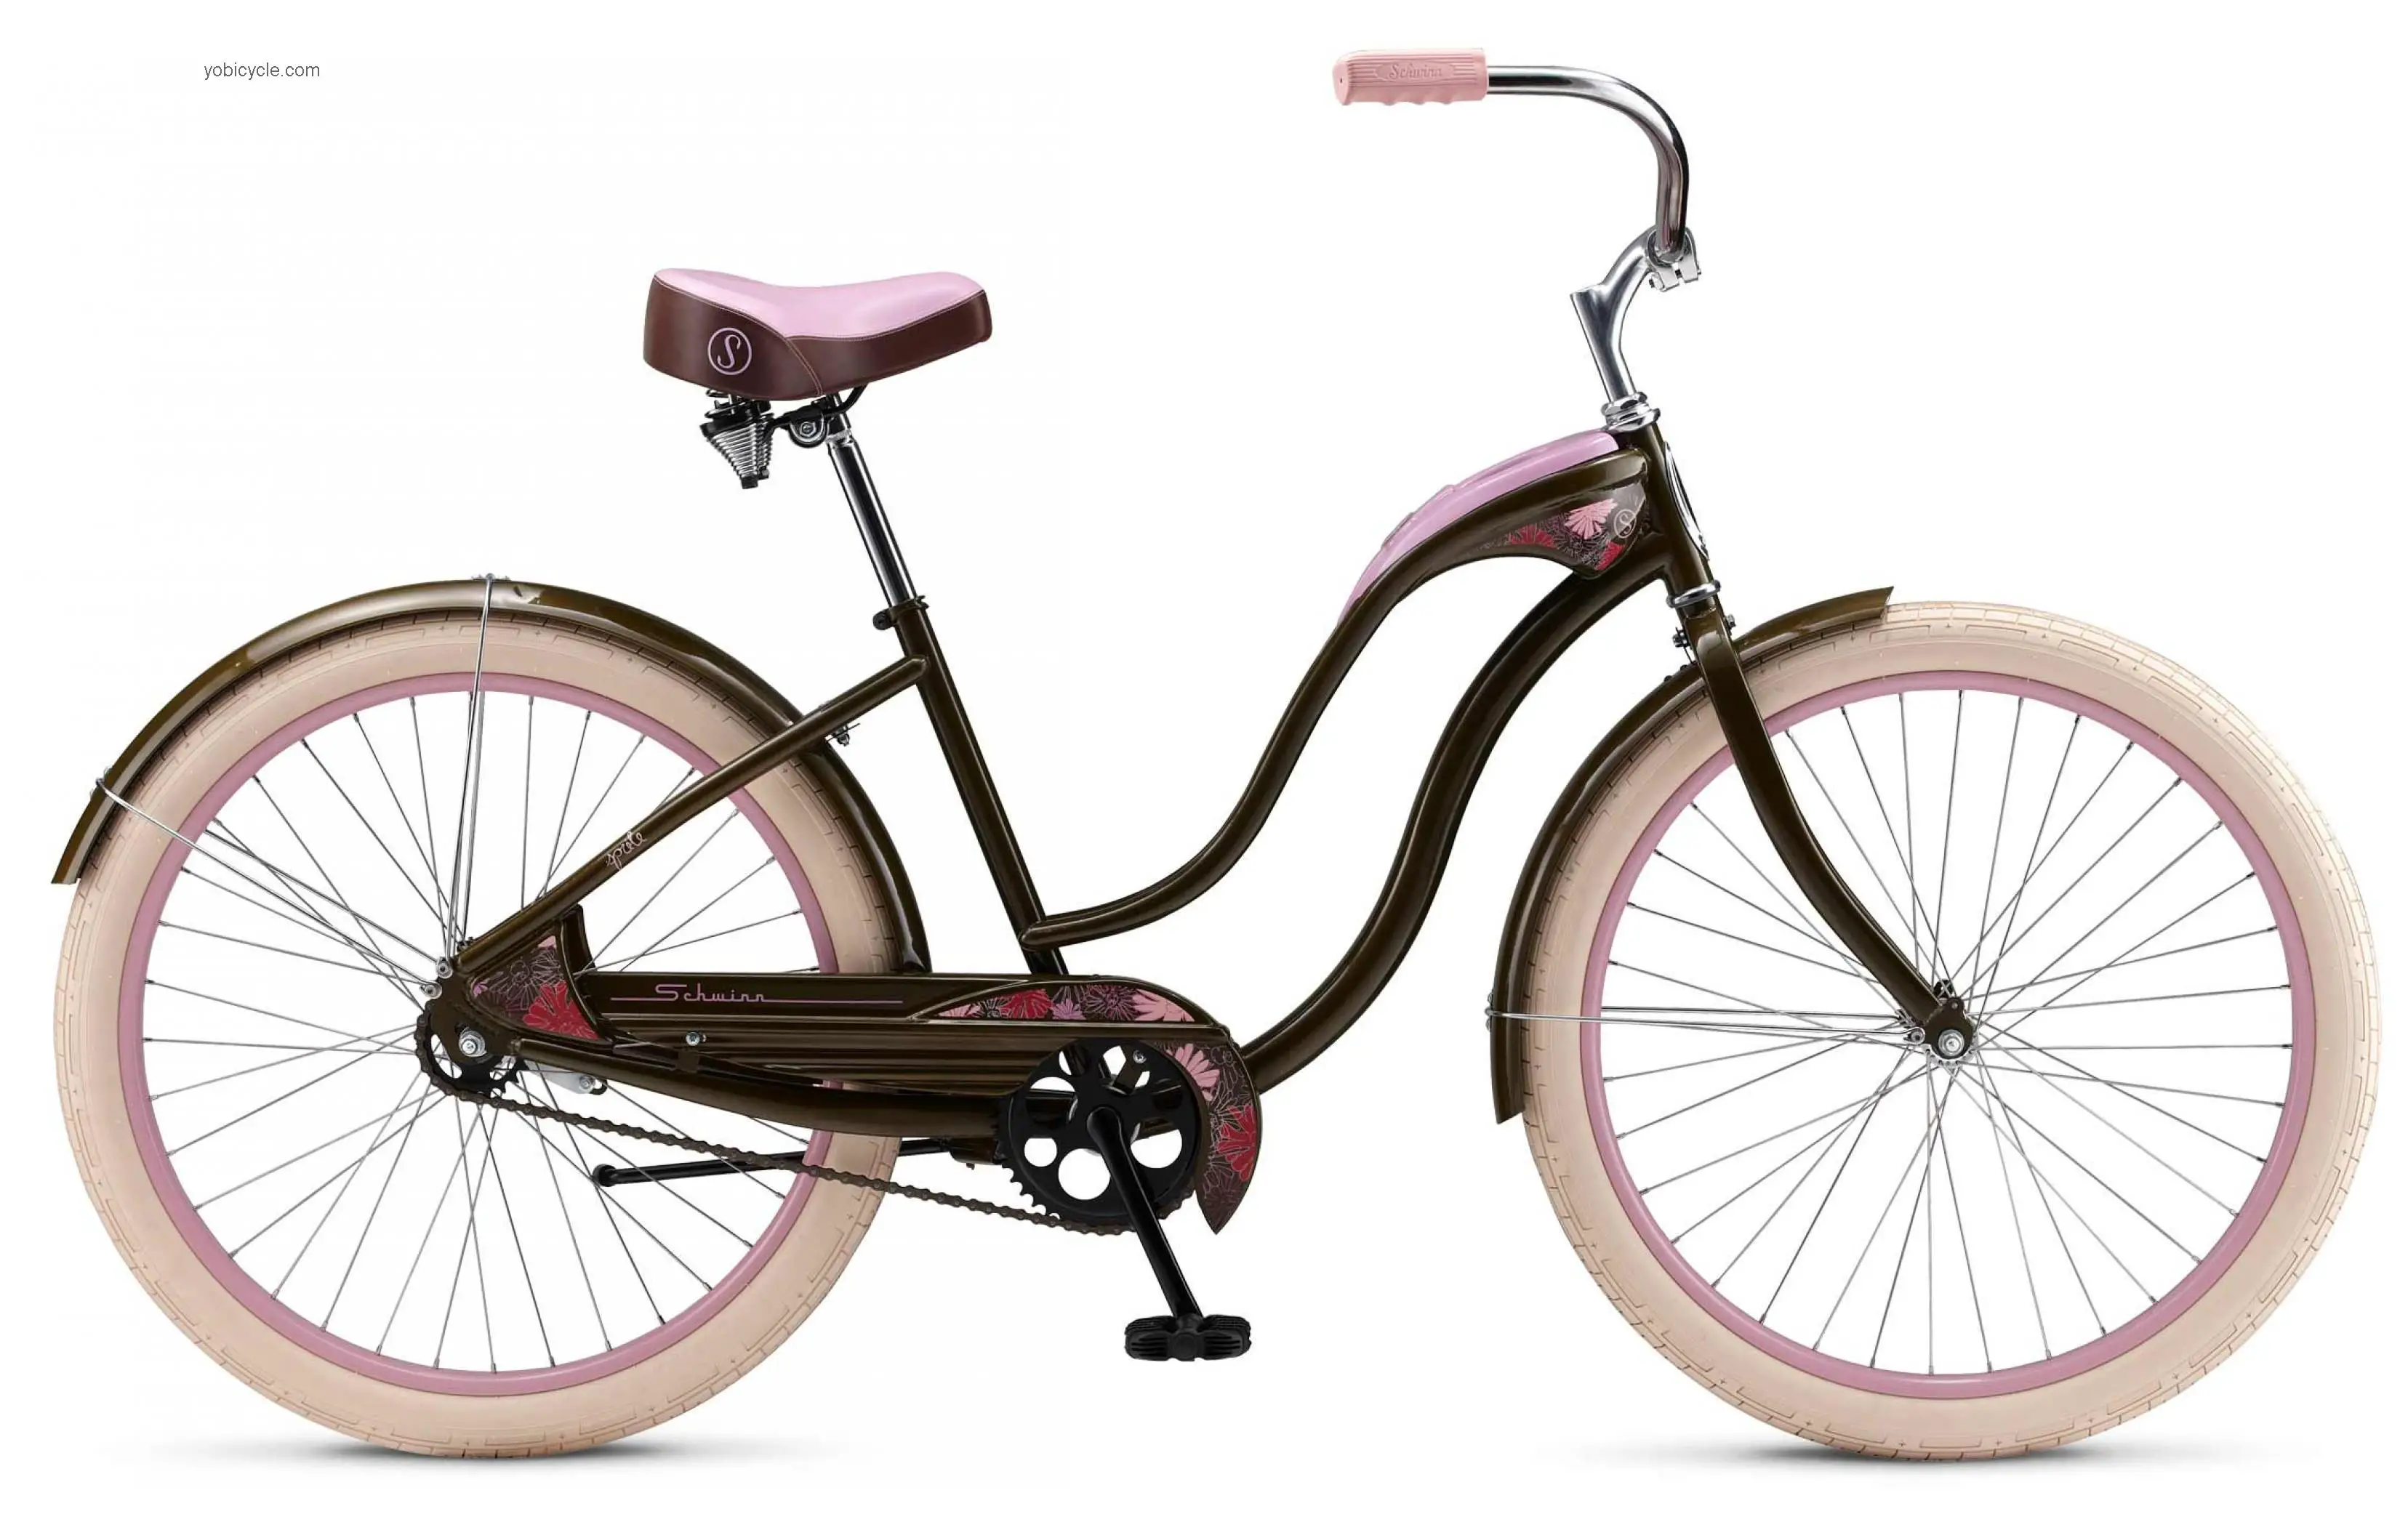 Schwinn Sprite Deluxe competitors and comparison tool online specs and performance